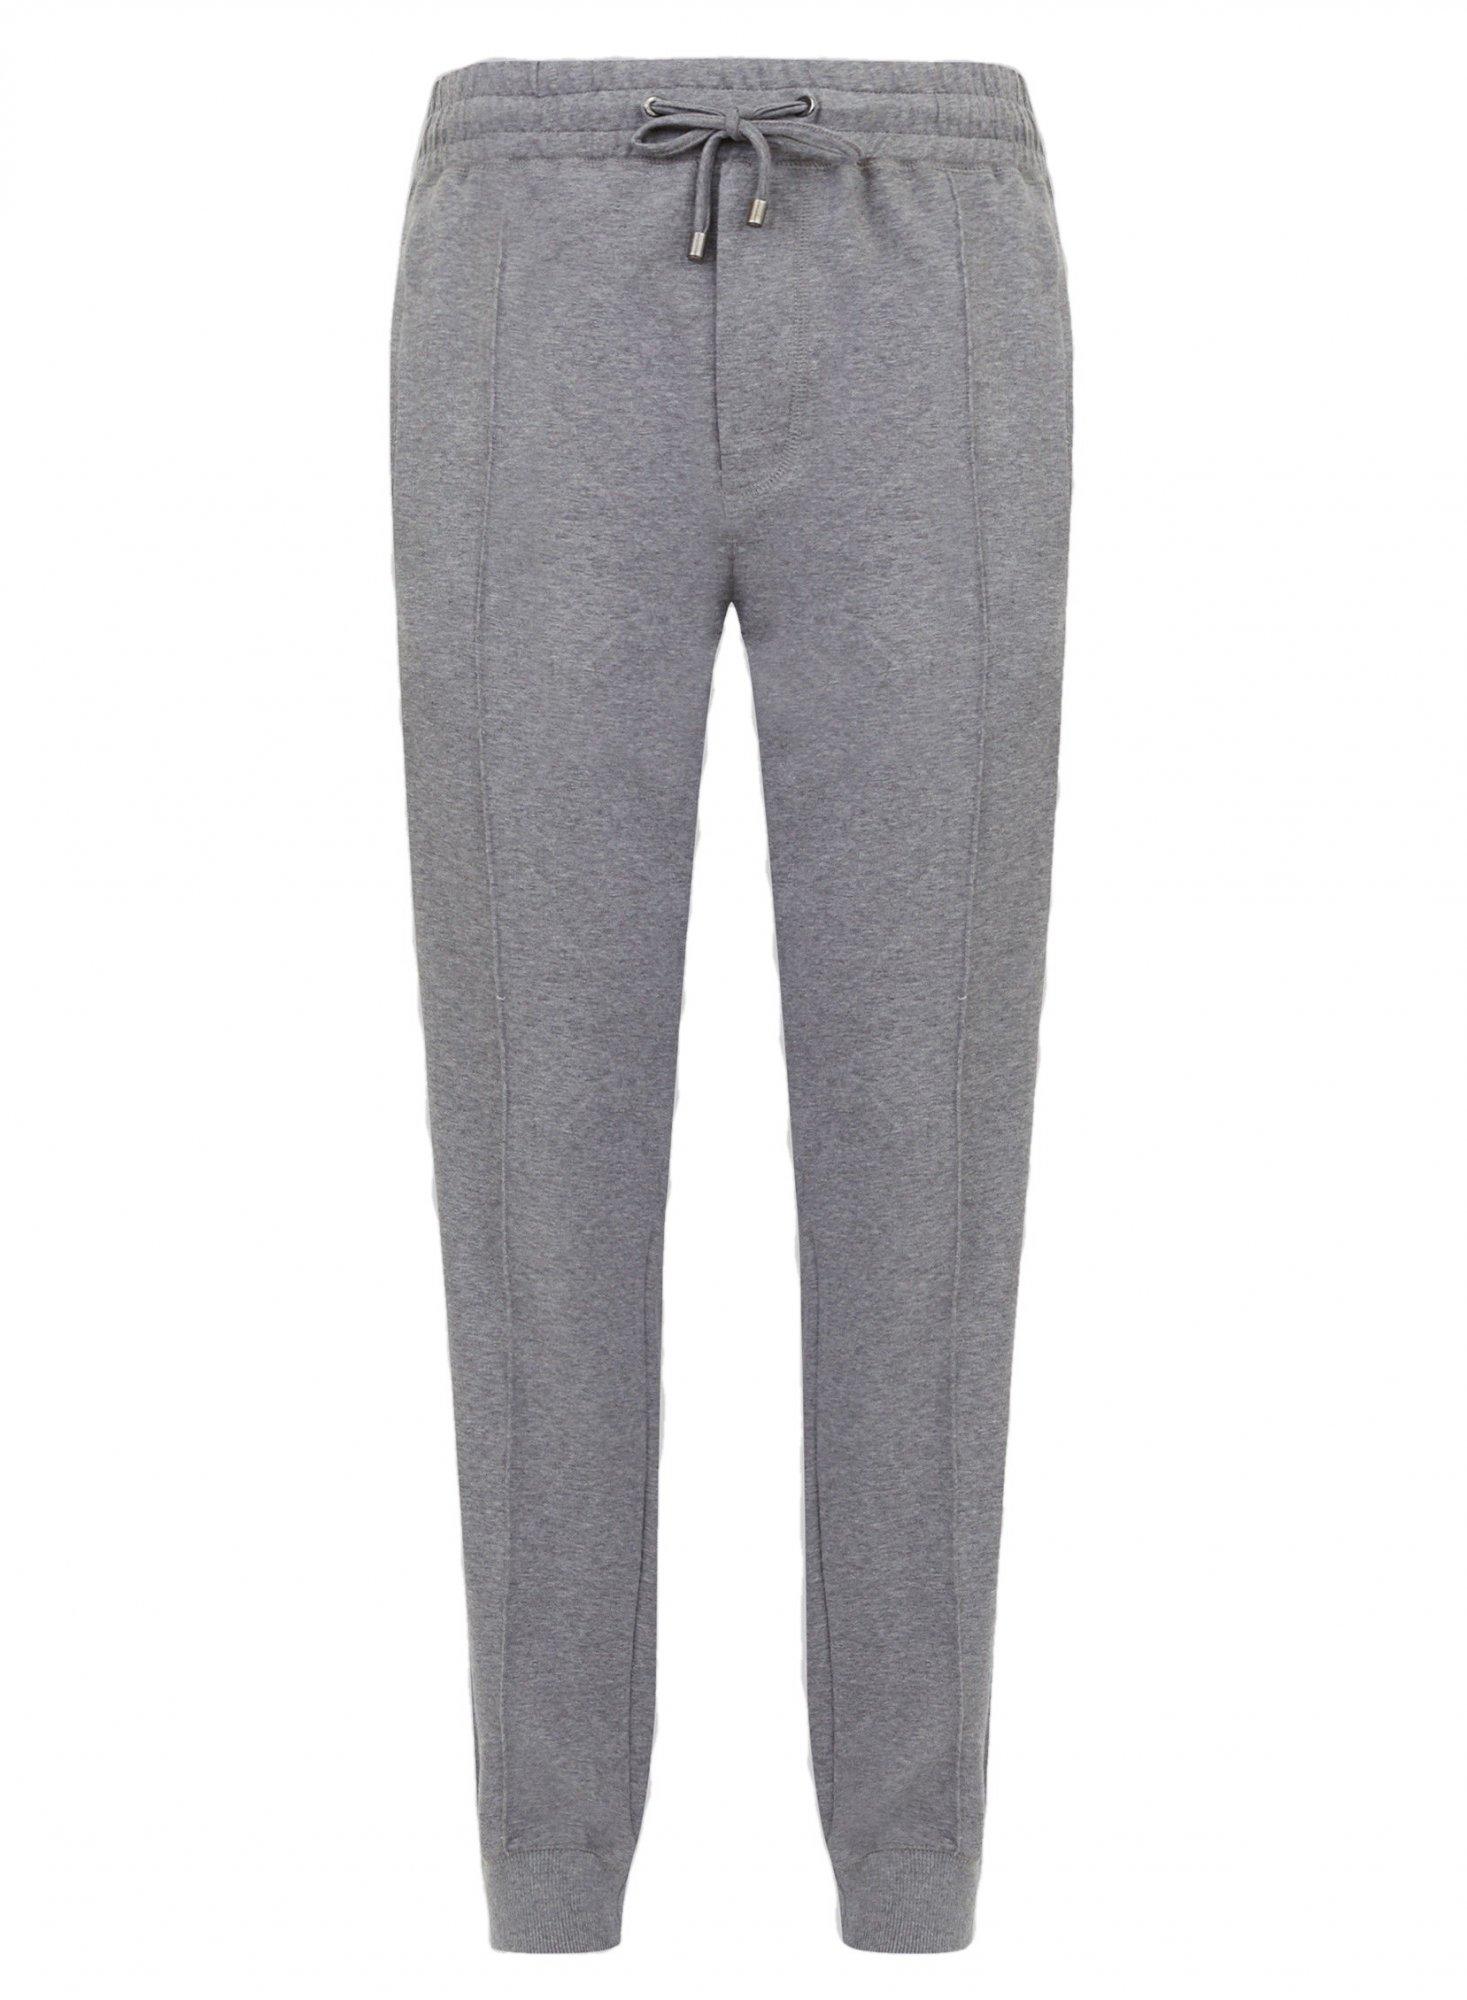 Grey sweatpants from Etro. Made of cotton. Pulled with drawcords. Embellished with printed logo and vibrant-printed panels down the sides. Feature two inset front pockets, one welt back pocket and elasticated cuffs. 